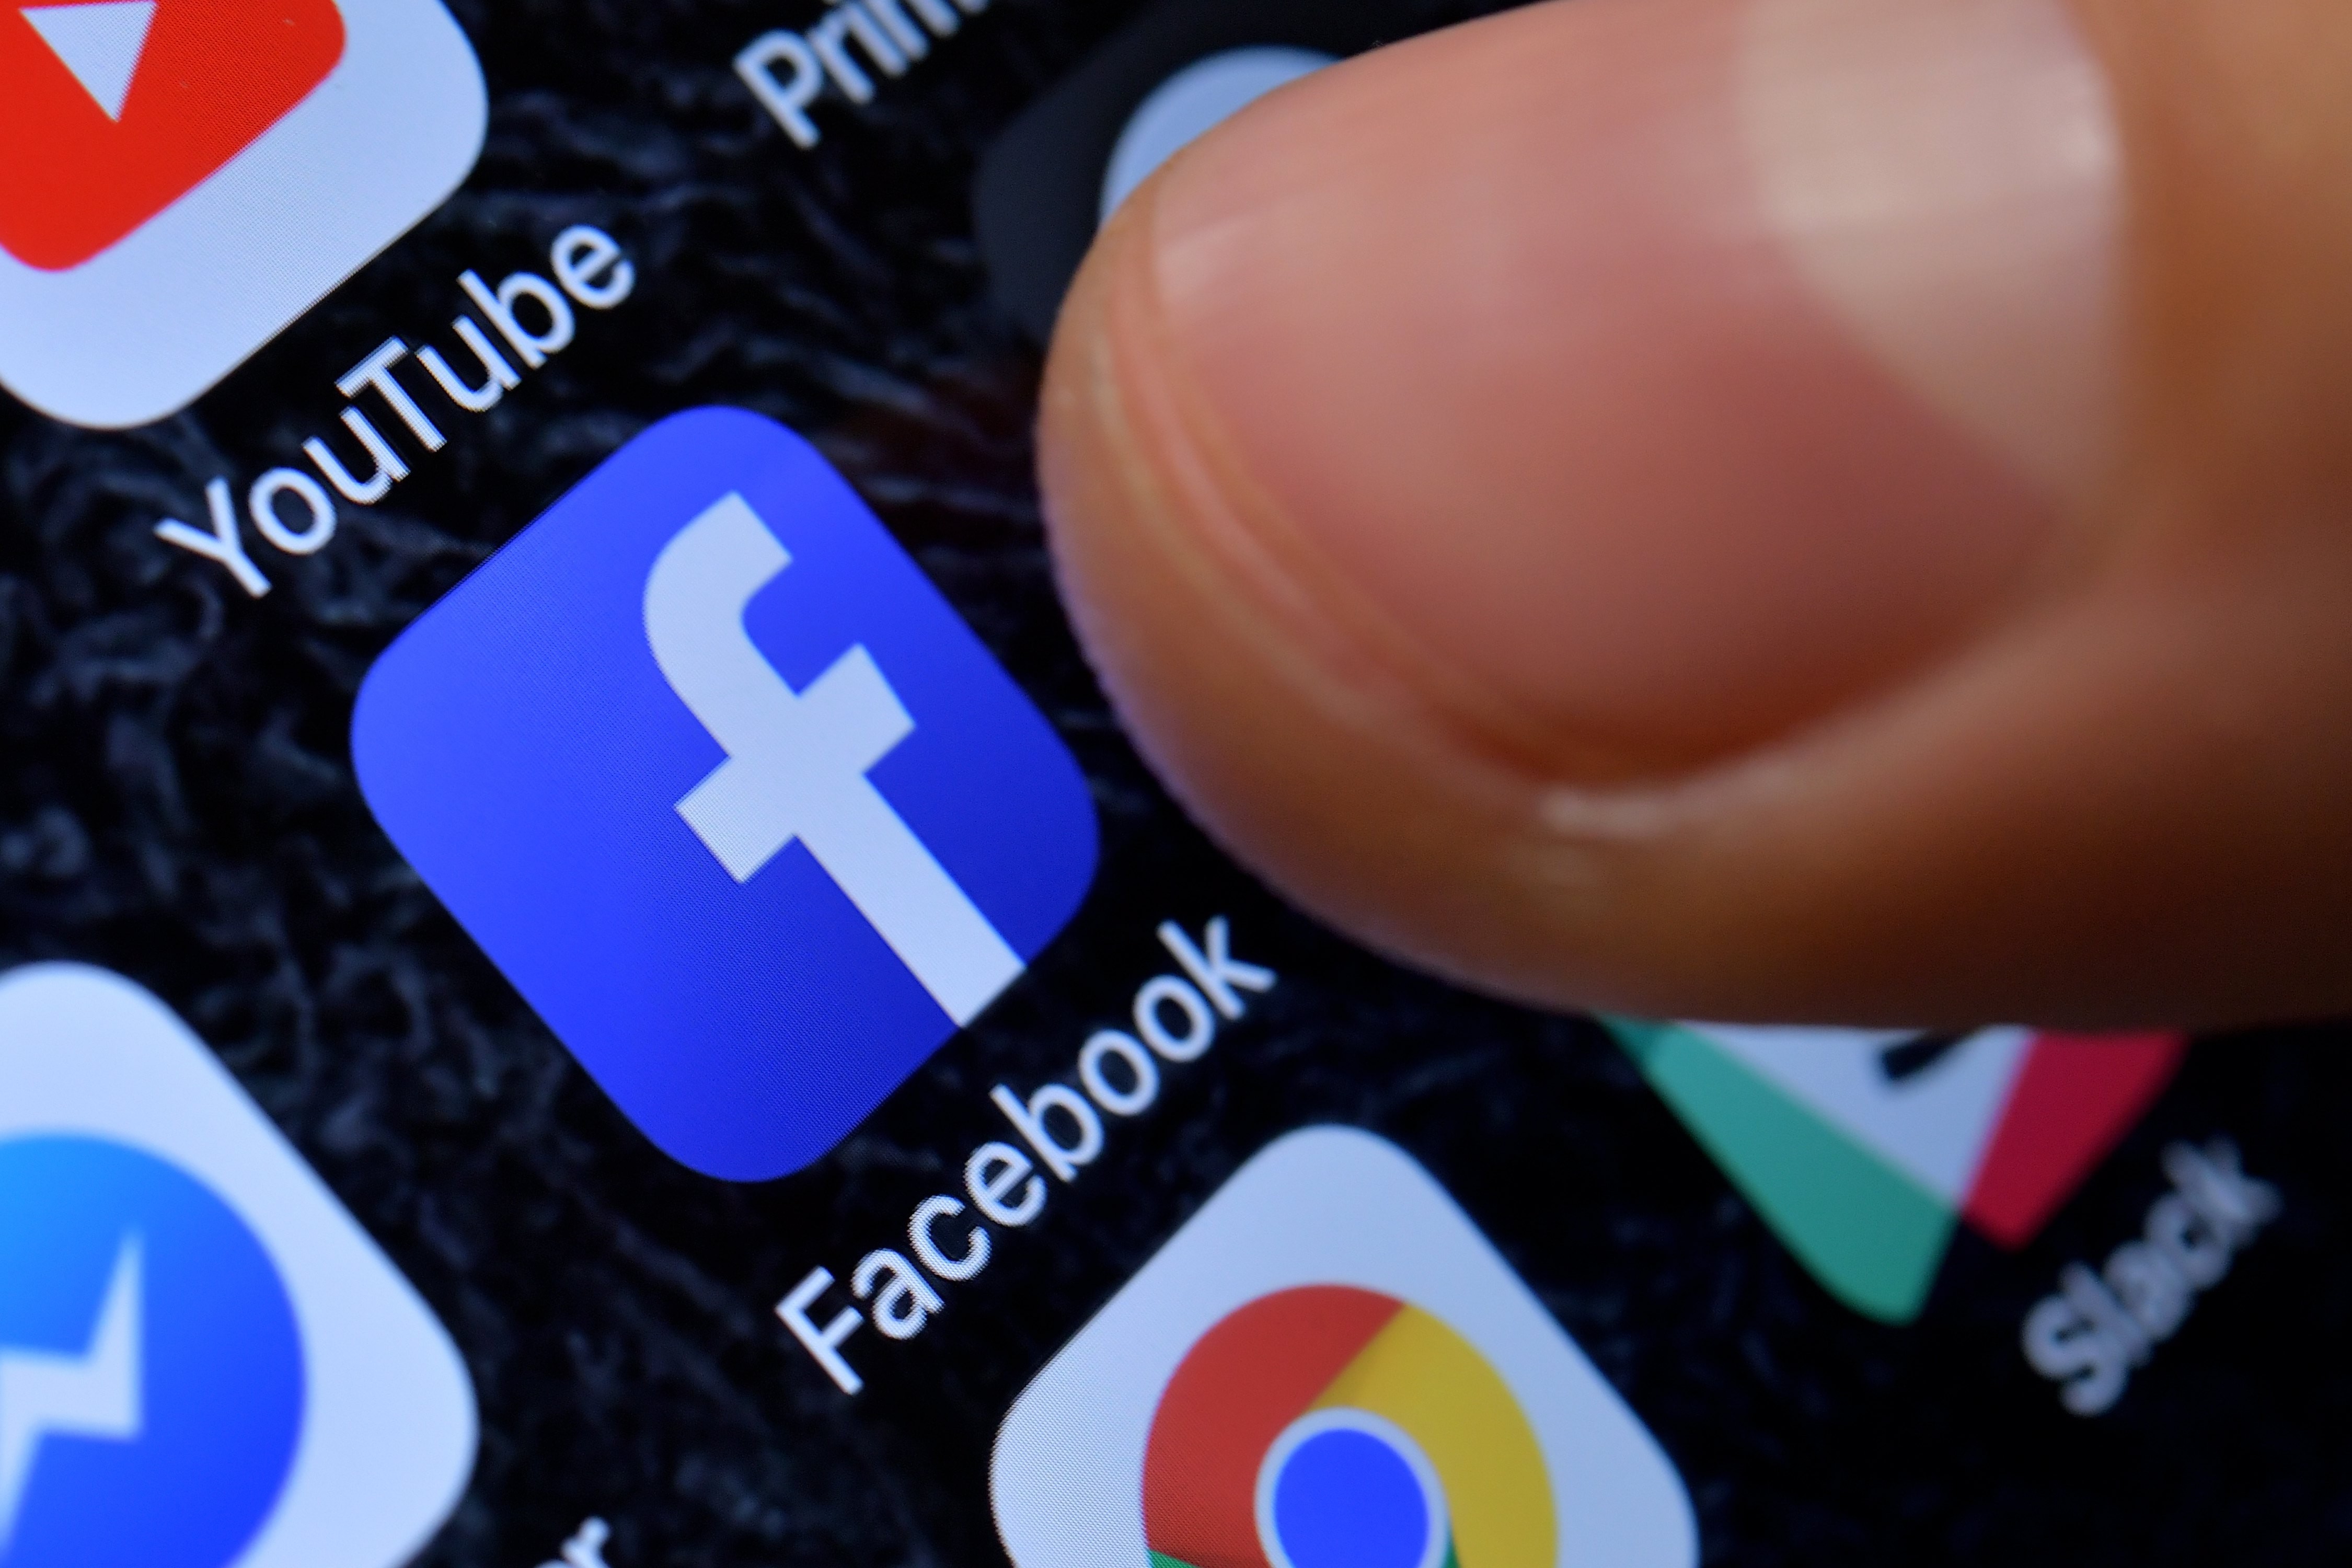 Browsing Facebook can leave people feeling worse afterwards, researchers at the social network company have admitted. Photo: EPA-EFE